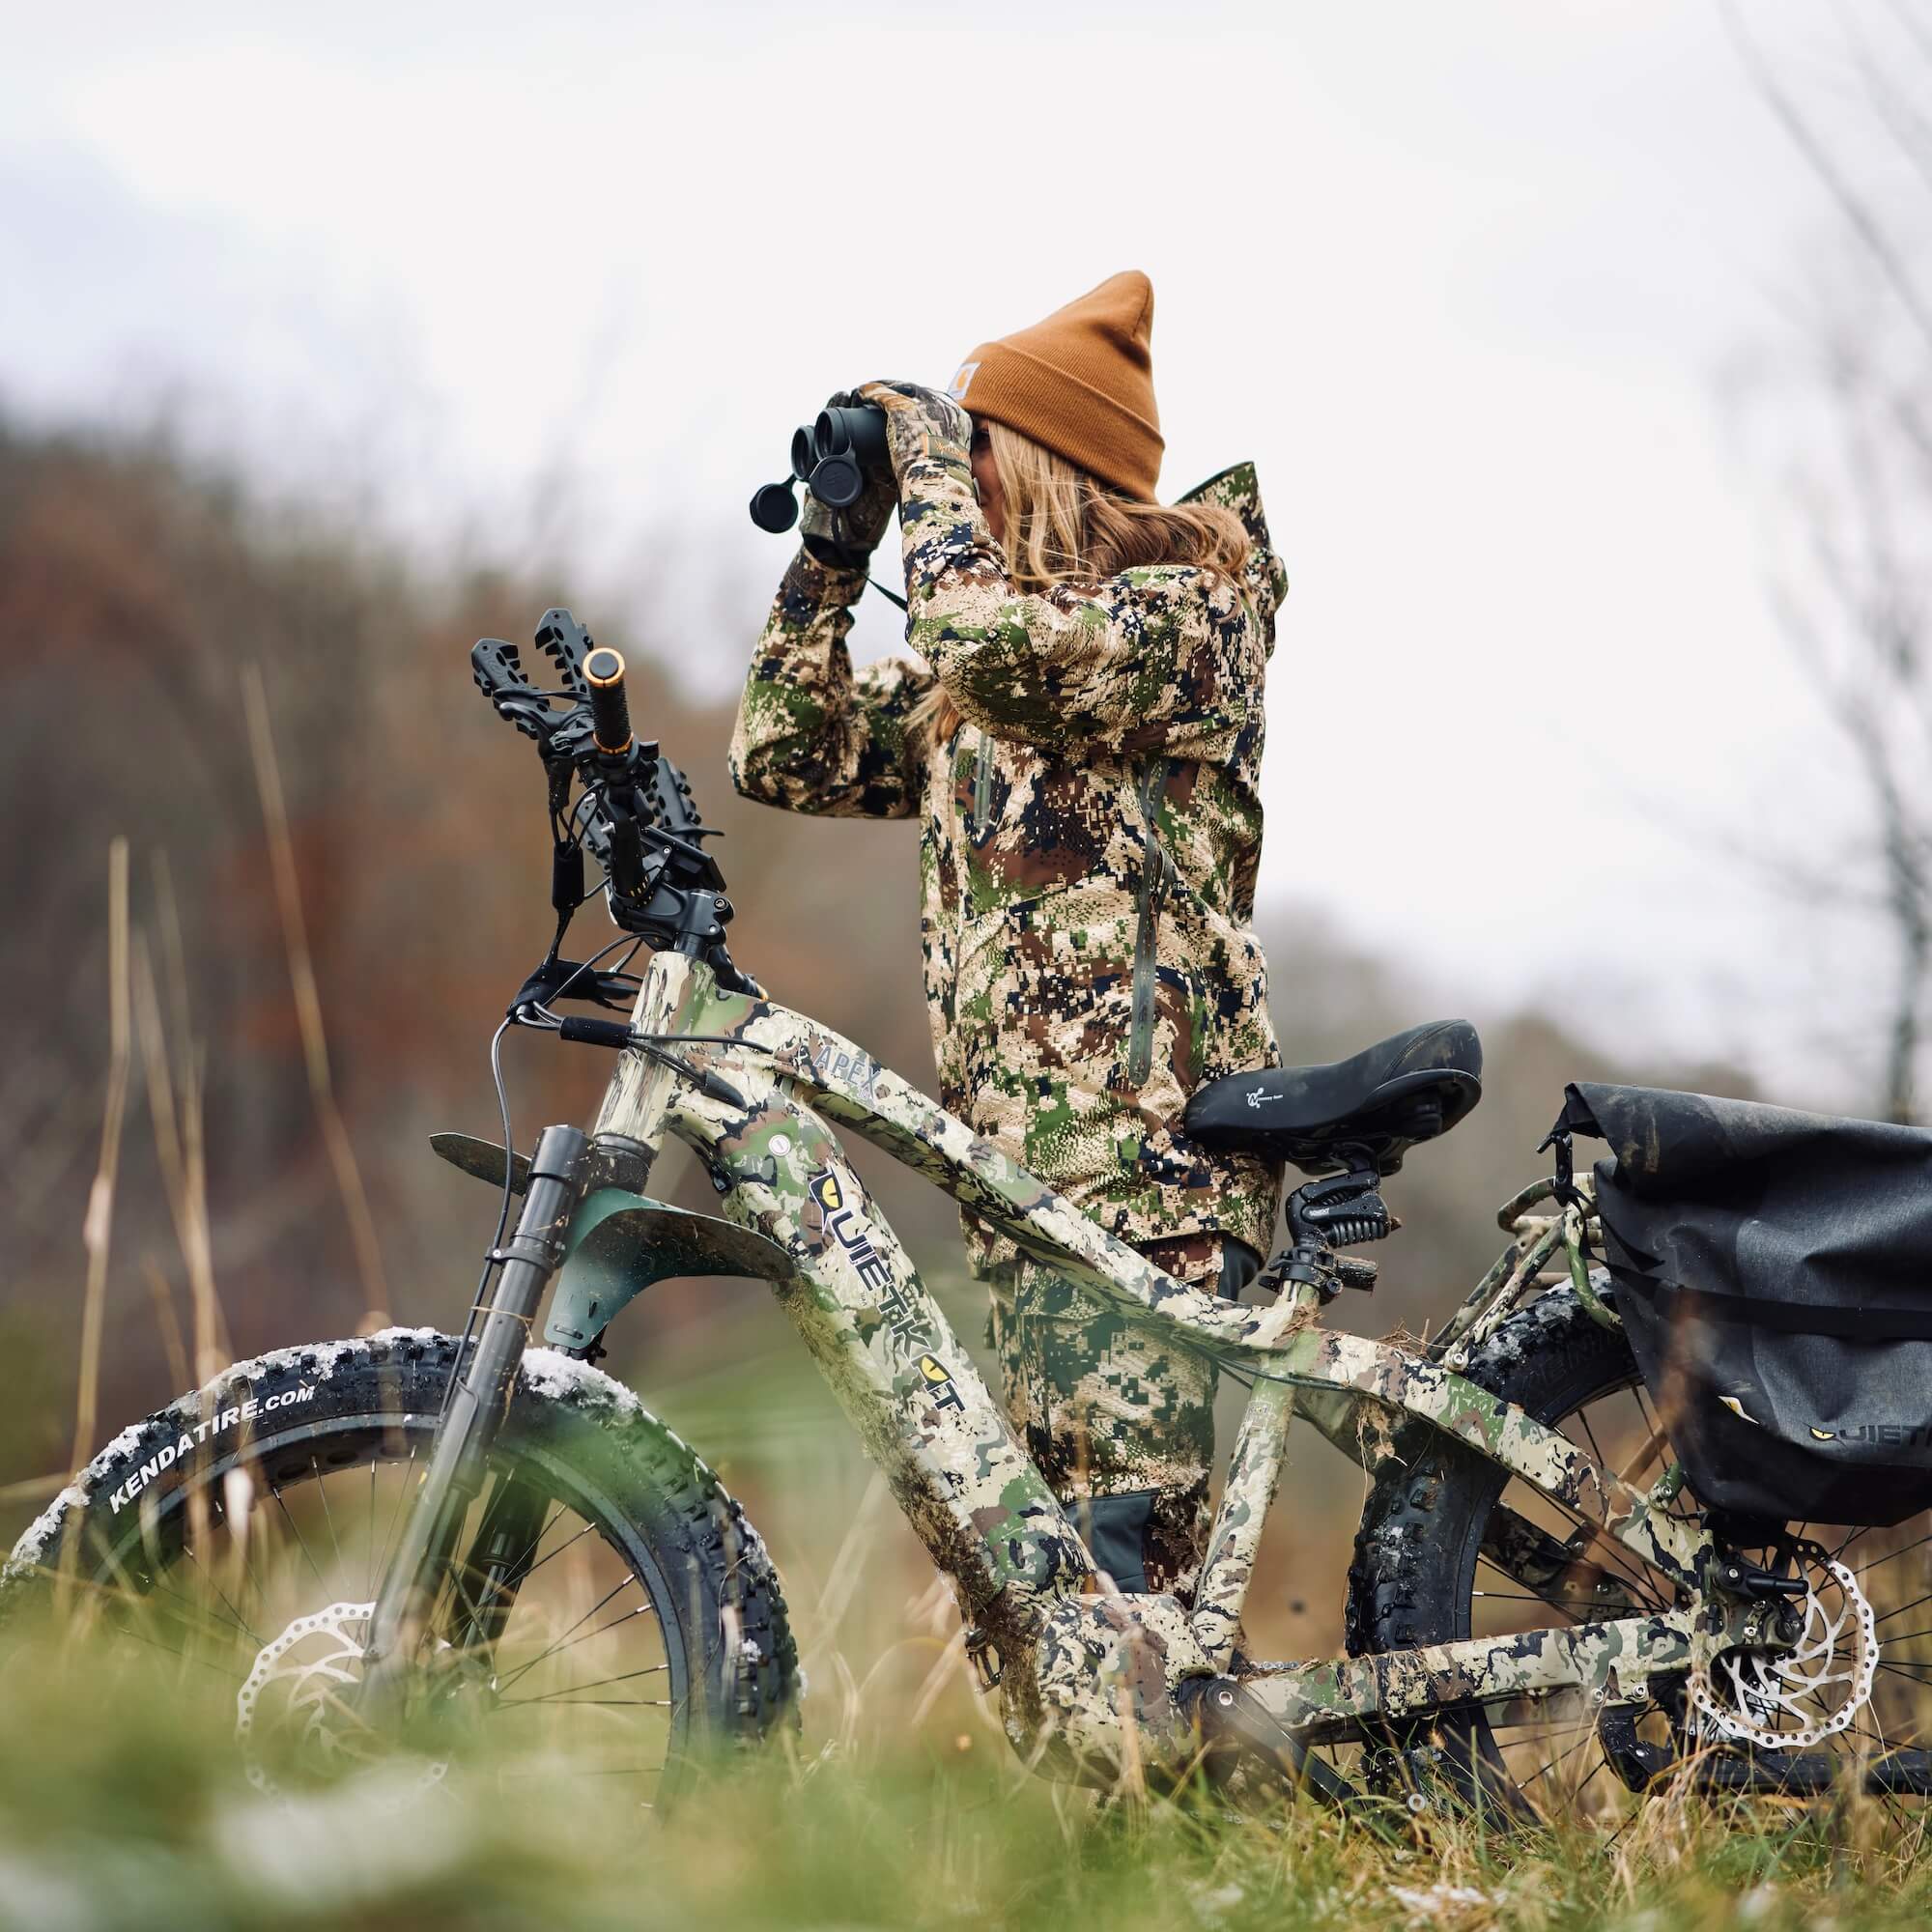 Off-Road Comfort | The comfort saddle, when combined with the Kinekt suspension seat post, ensures the utmost comfort during all your off-road adventures.